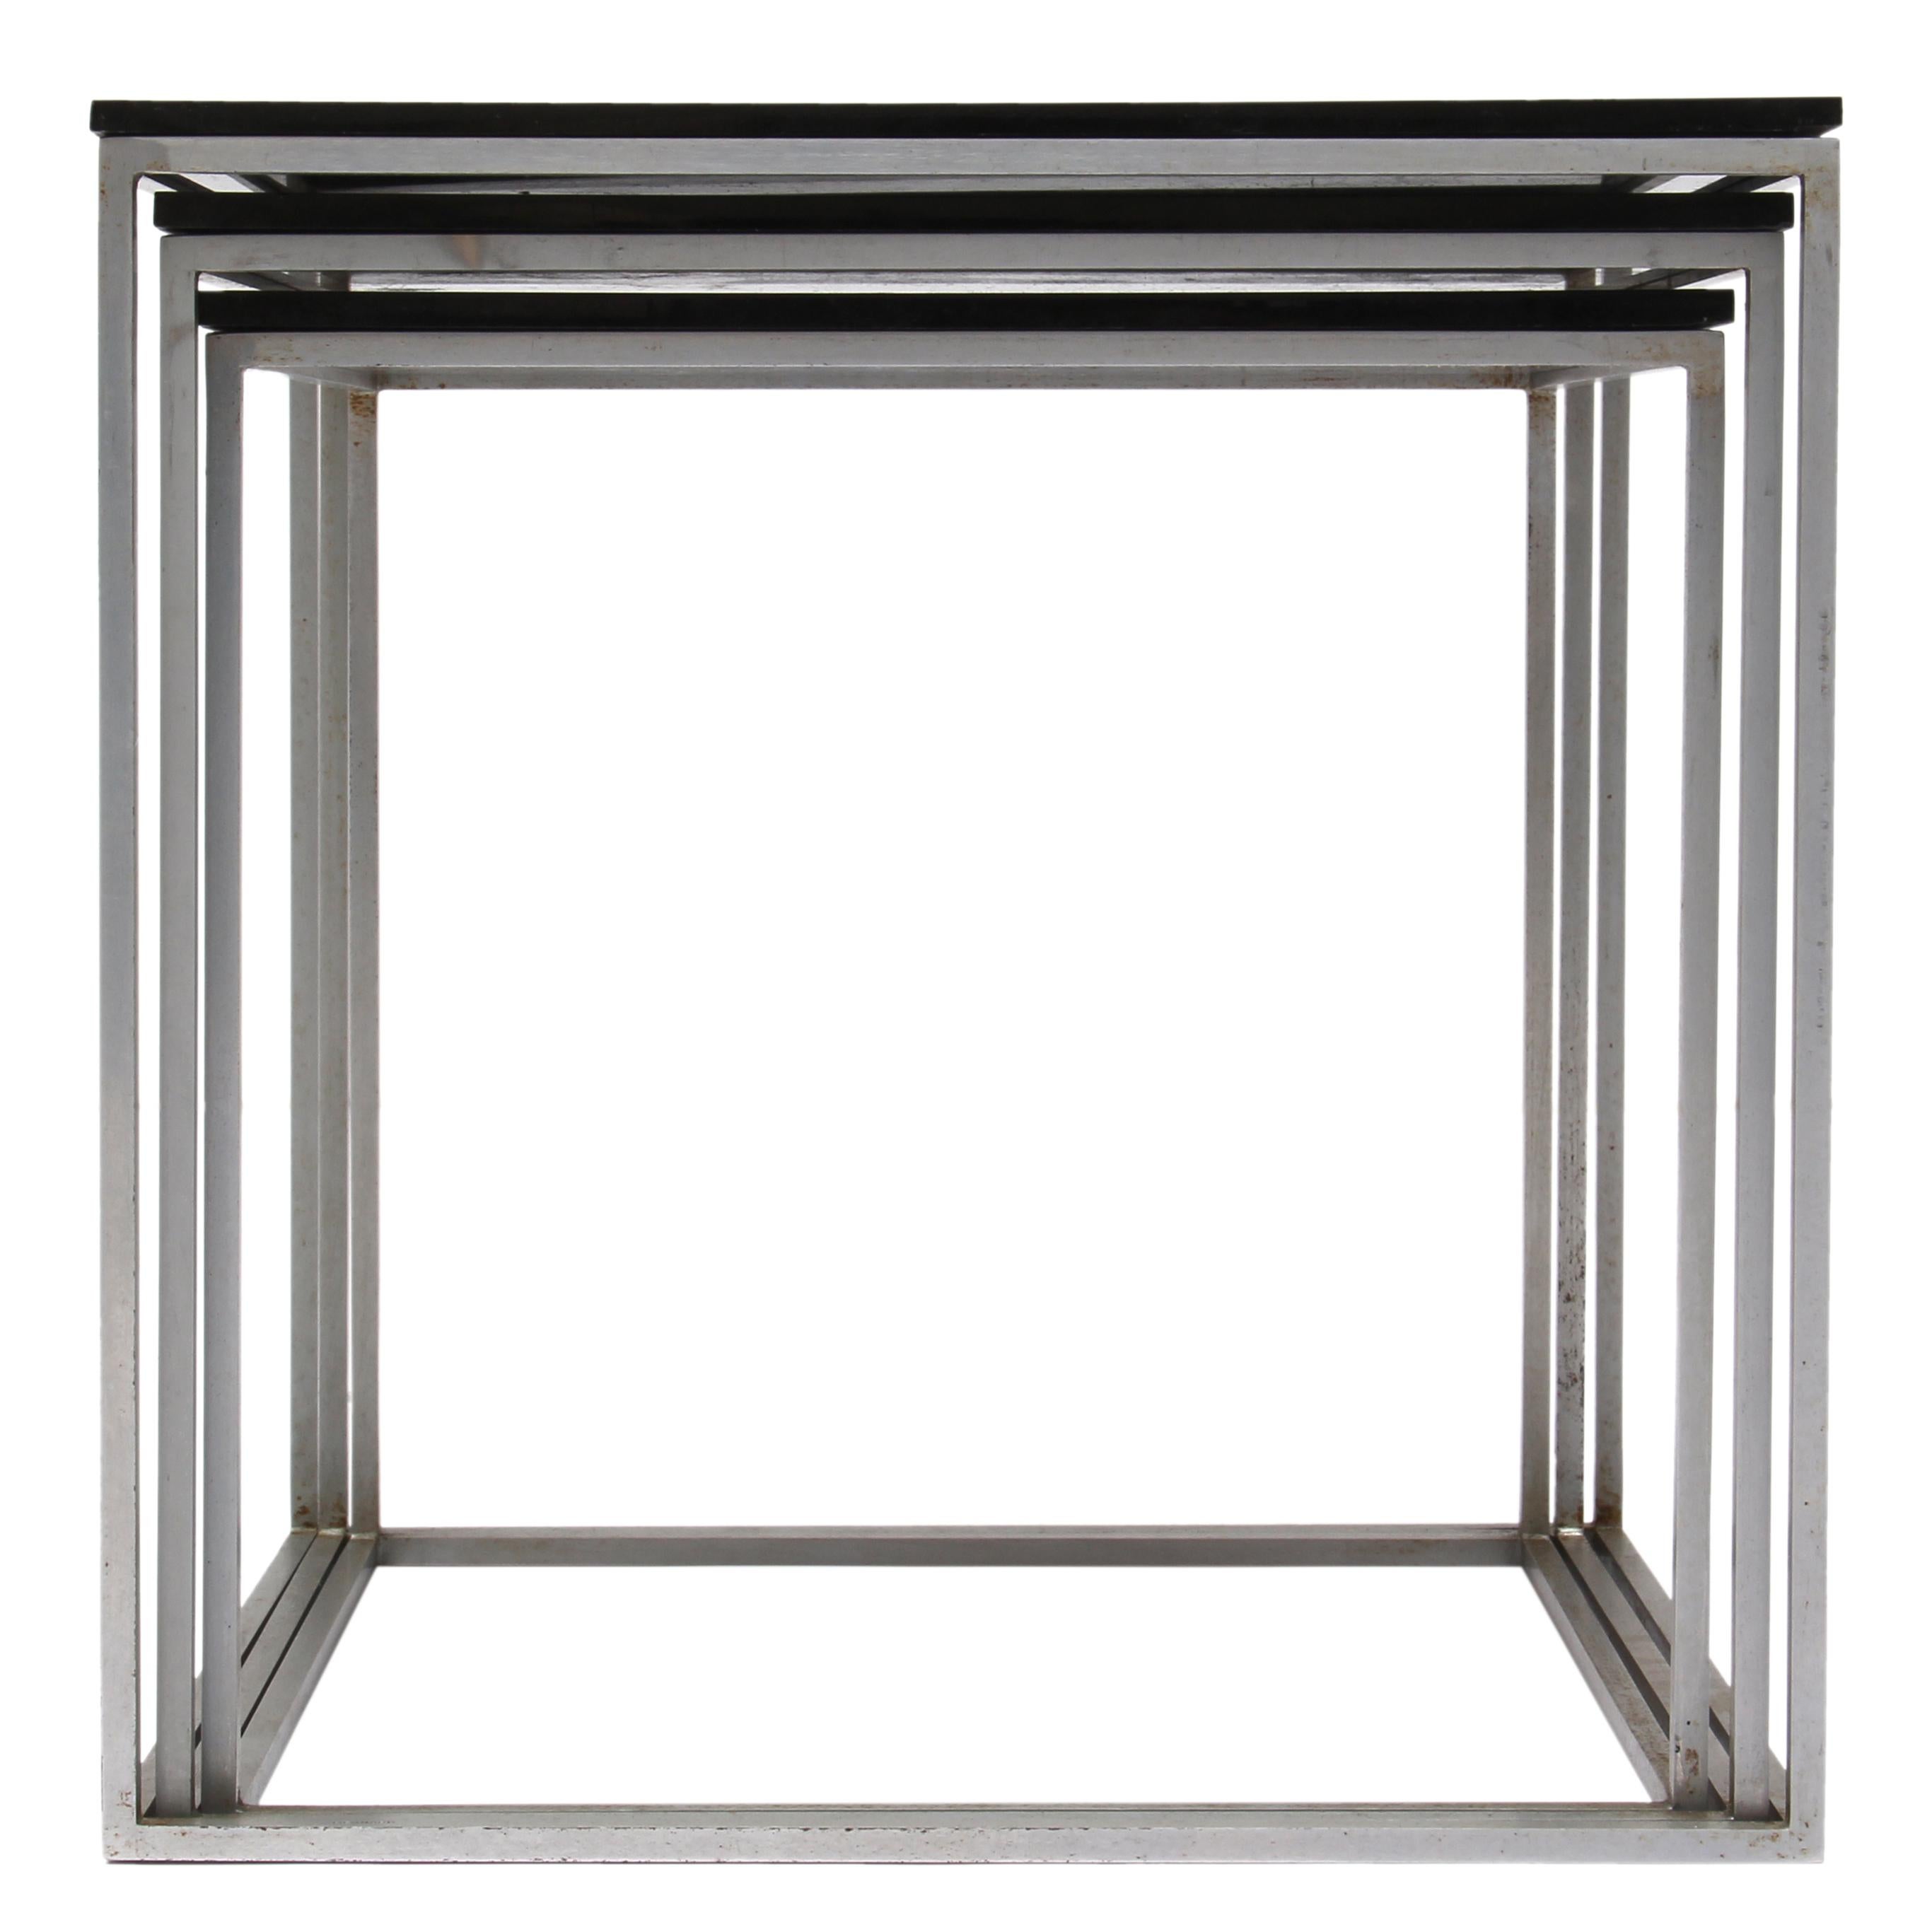 A fine set of three (3) ‘PK-71’ nesting tables with black acrylic tops and steel cube frames.
Also available with white acrylic tops.